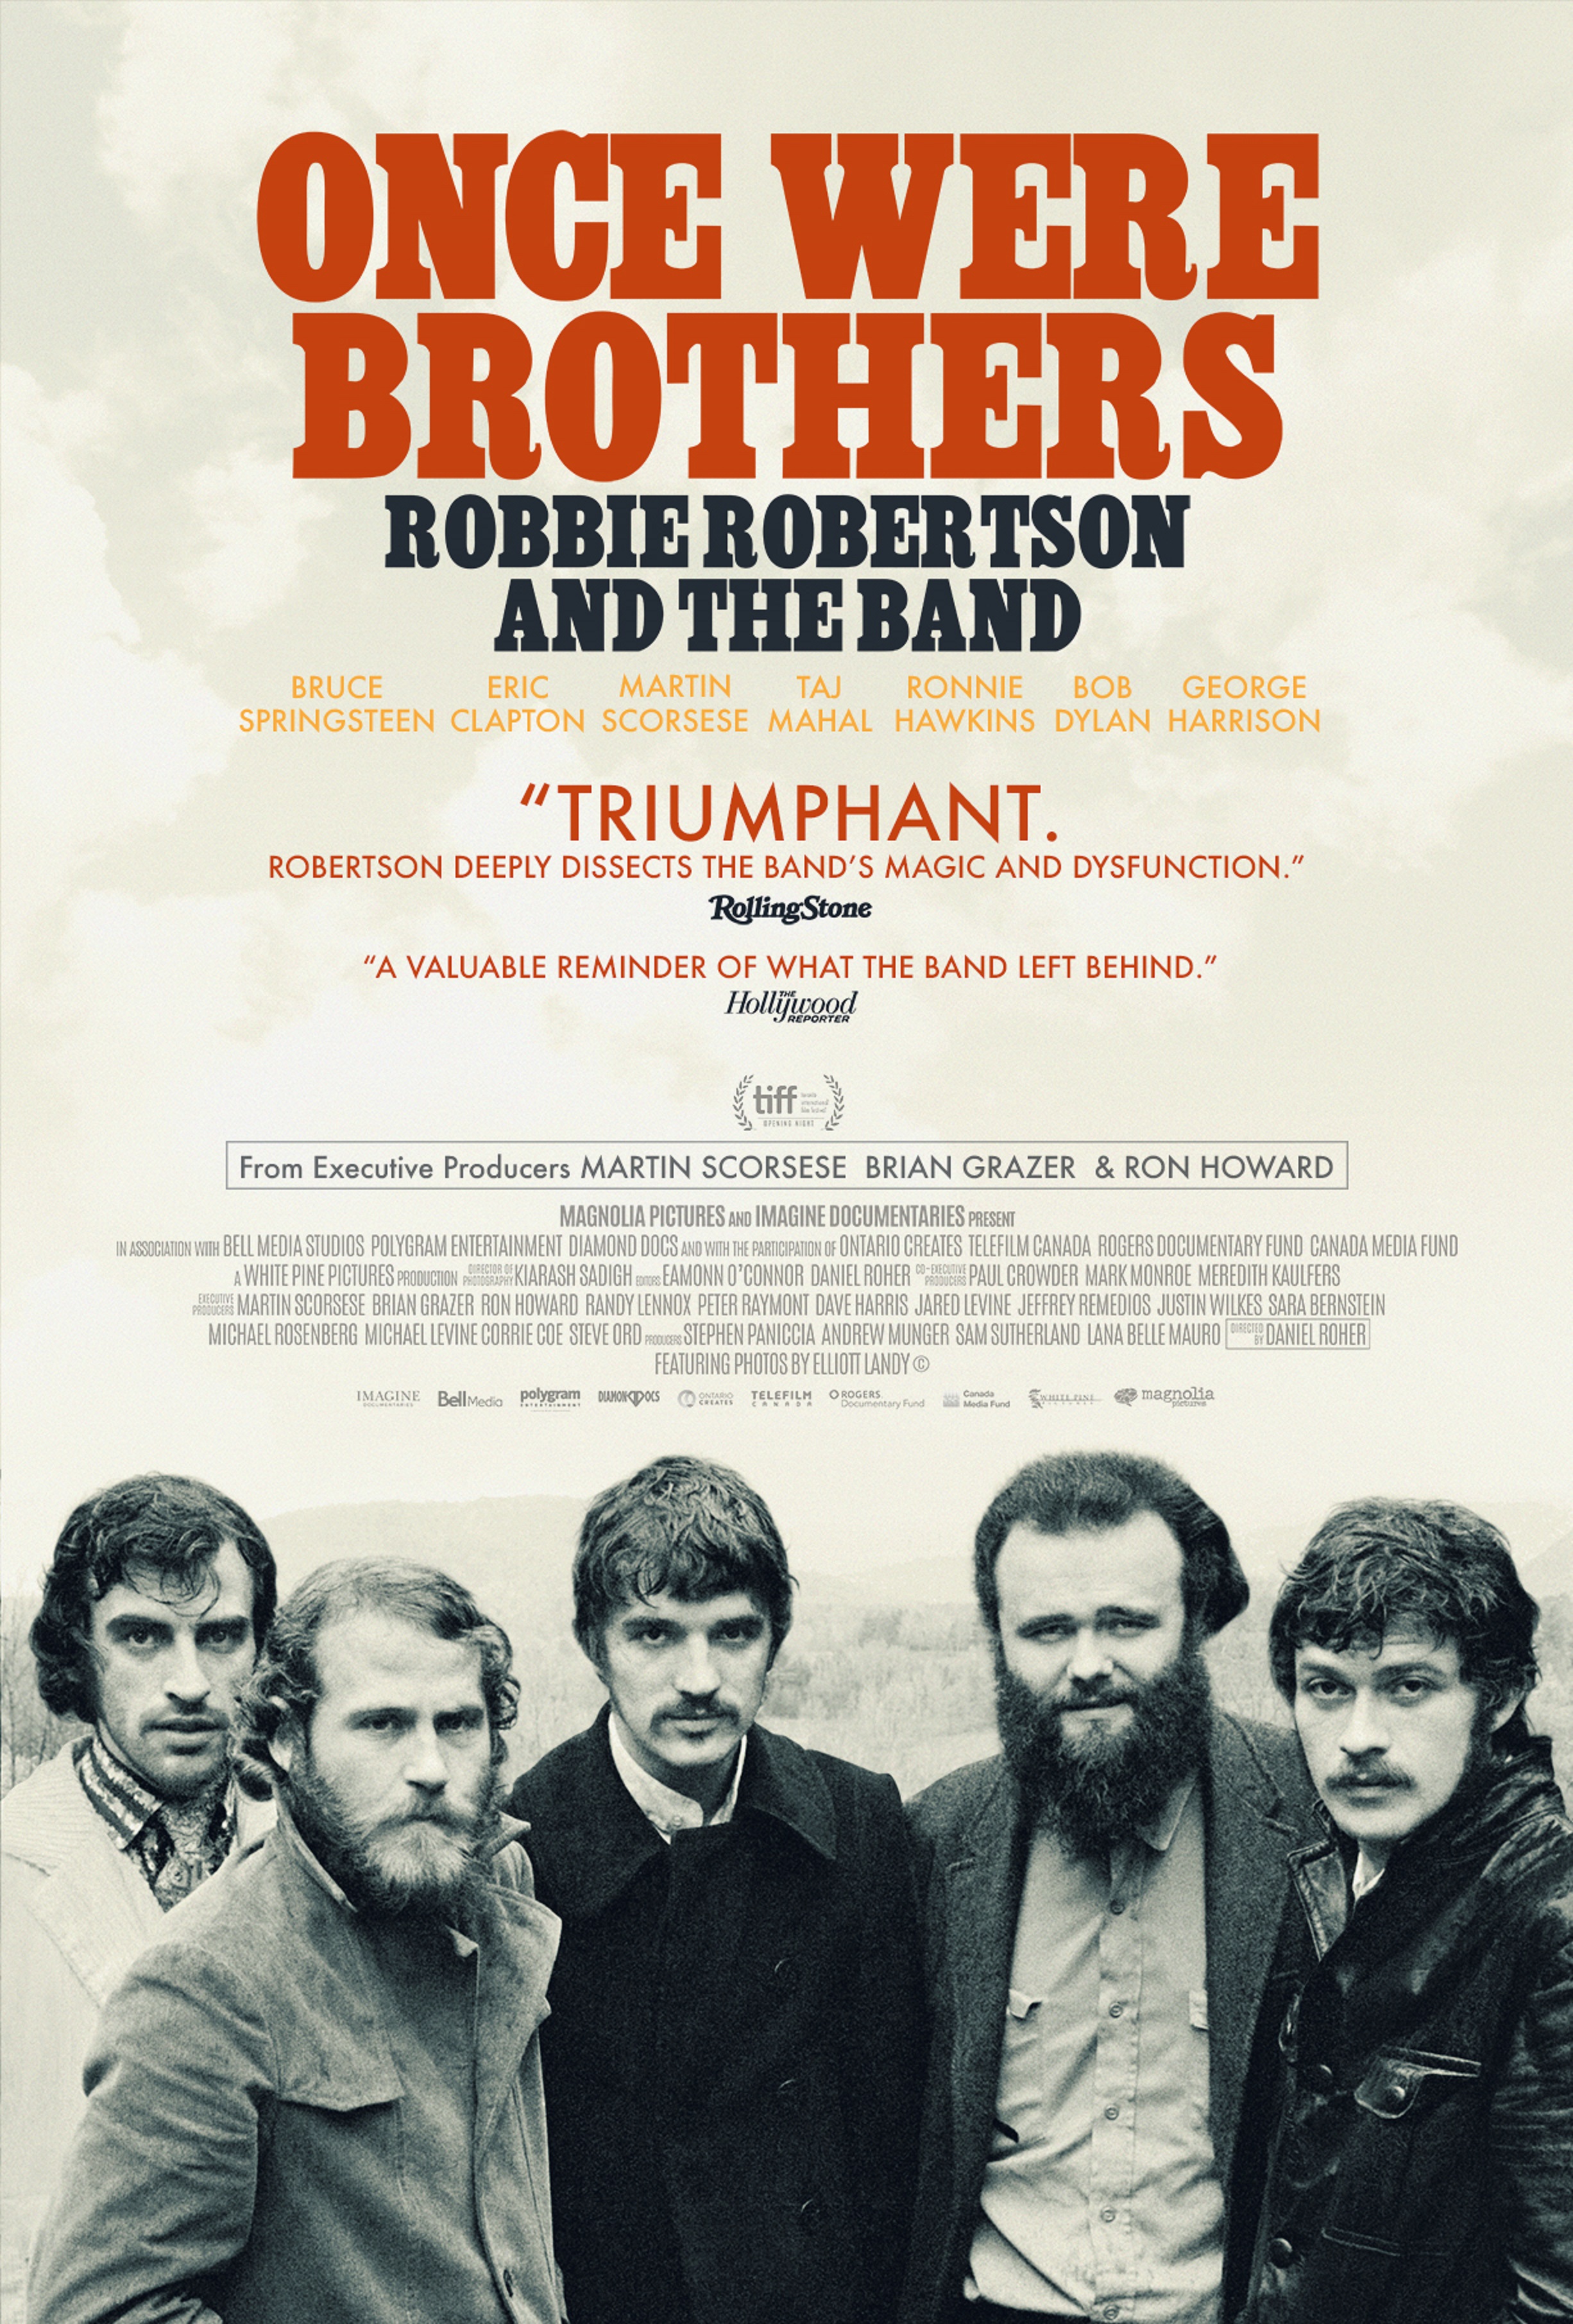 Watch the official trailer for The Band documentary ONCE WERE BROTHERS